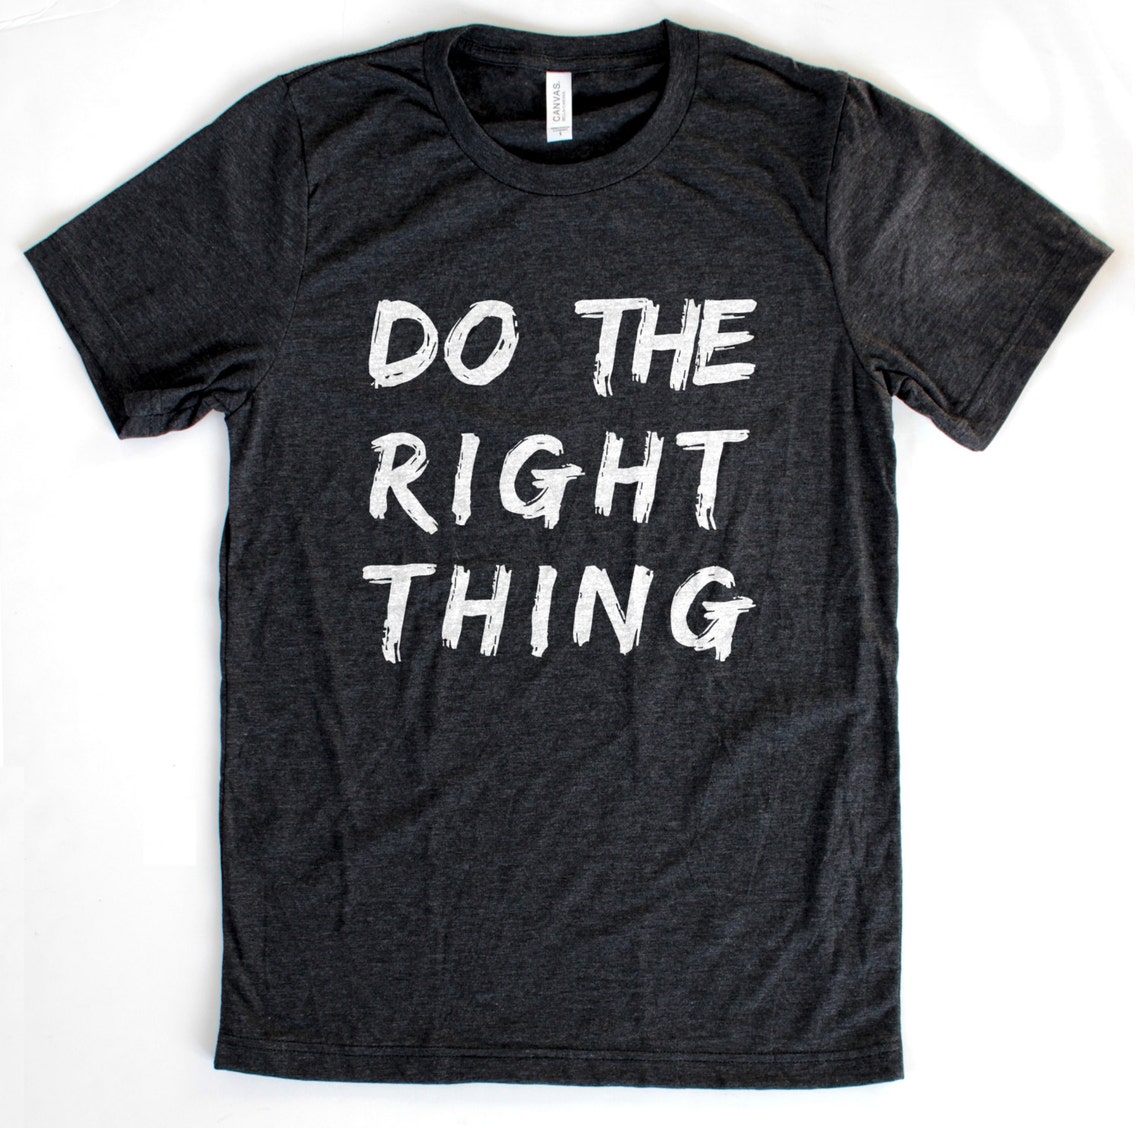 Do the Right Thing T-Shirt UNISEX/MENS Available in S M L | Etsy